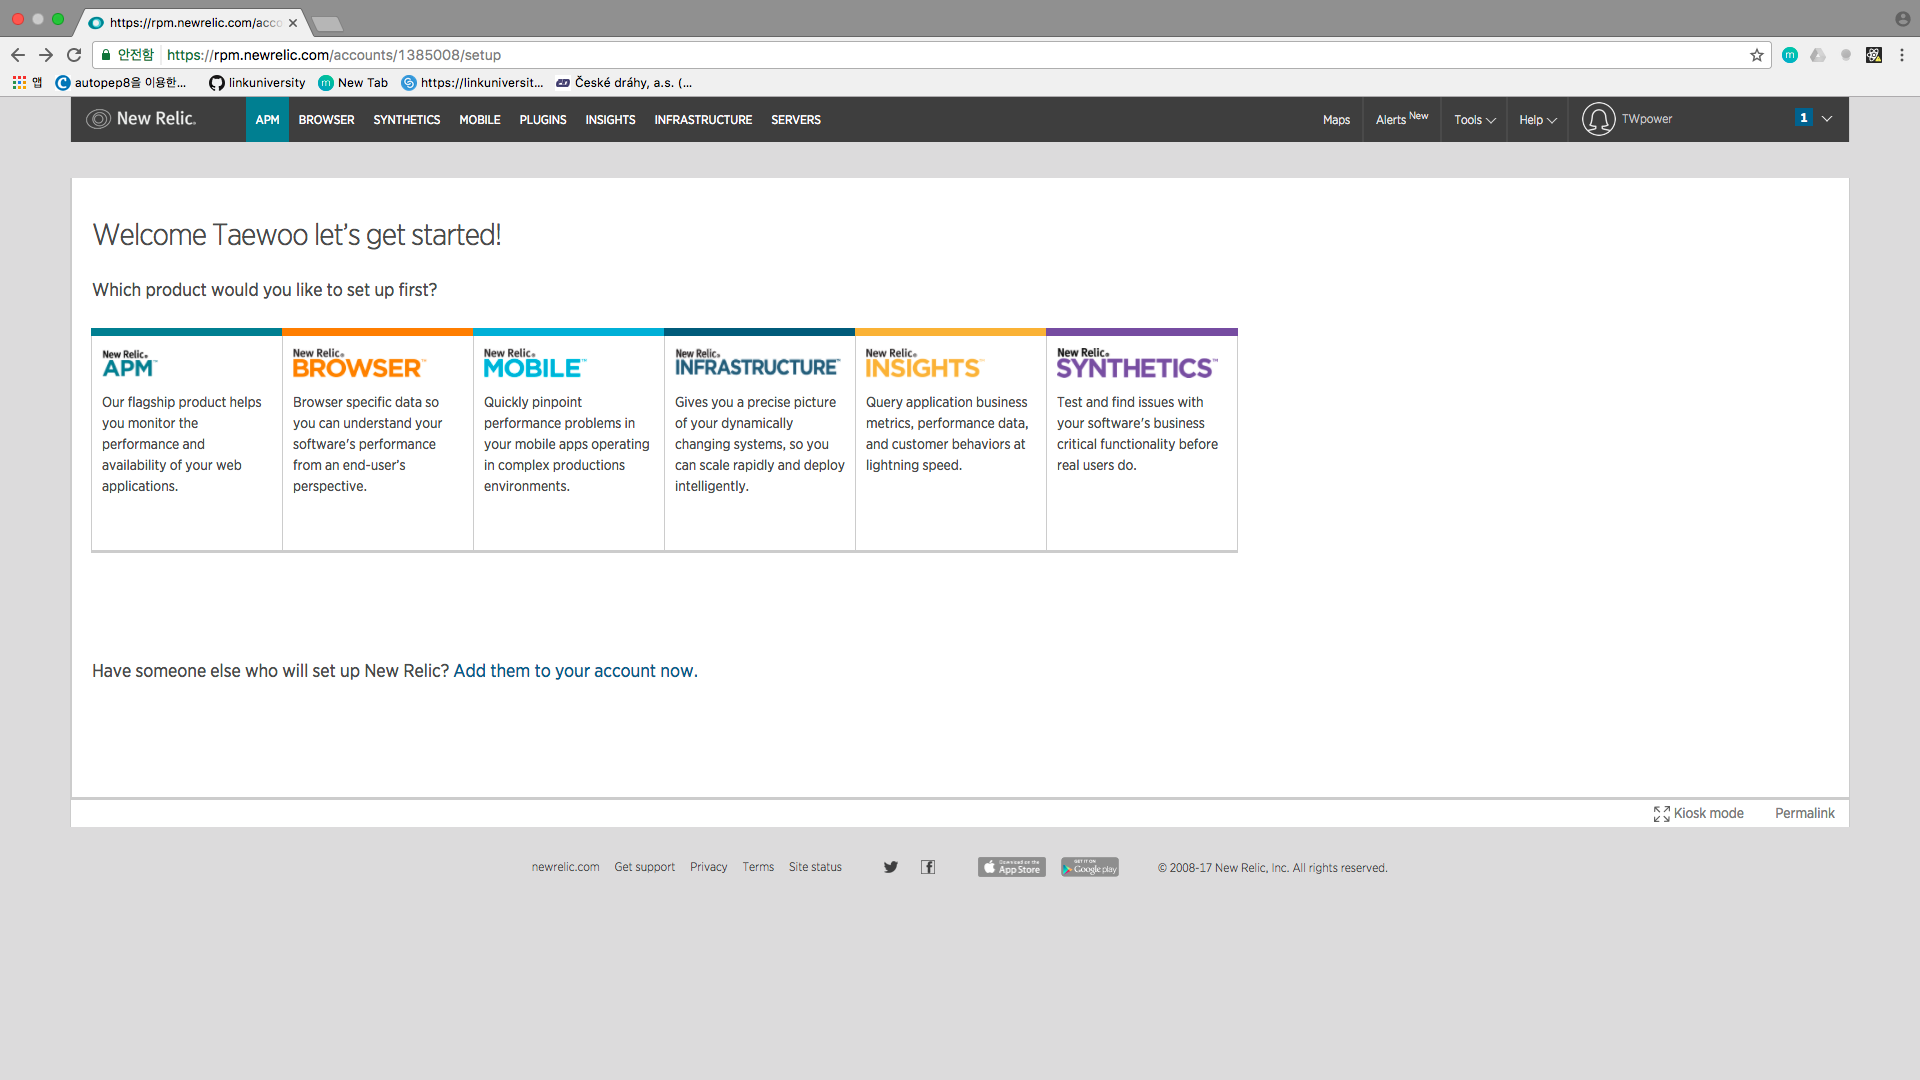 New Relic Page